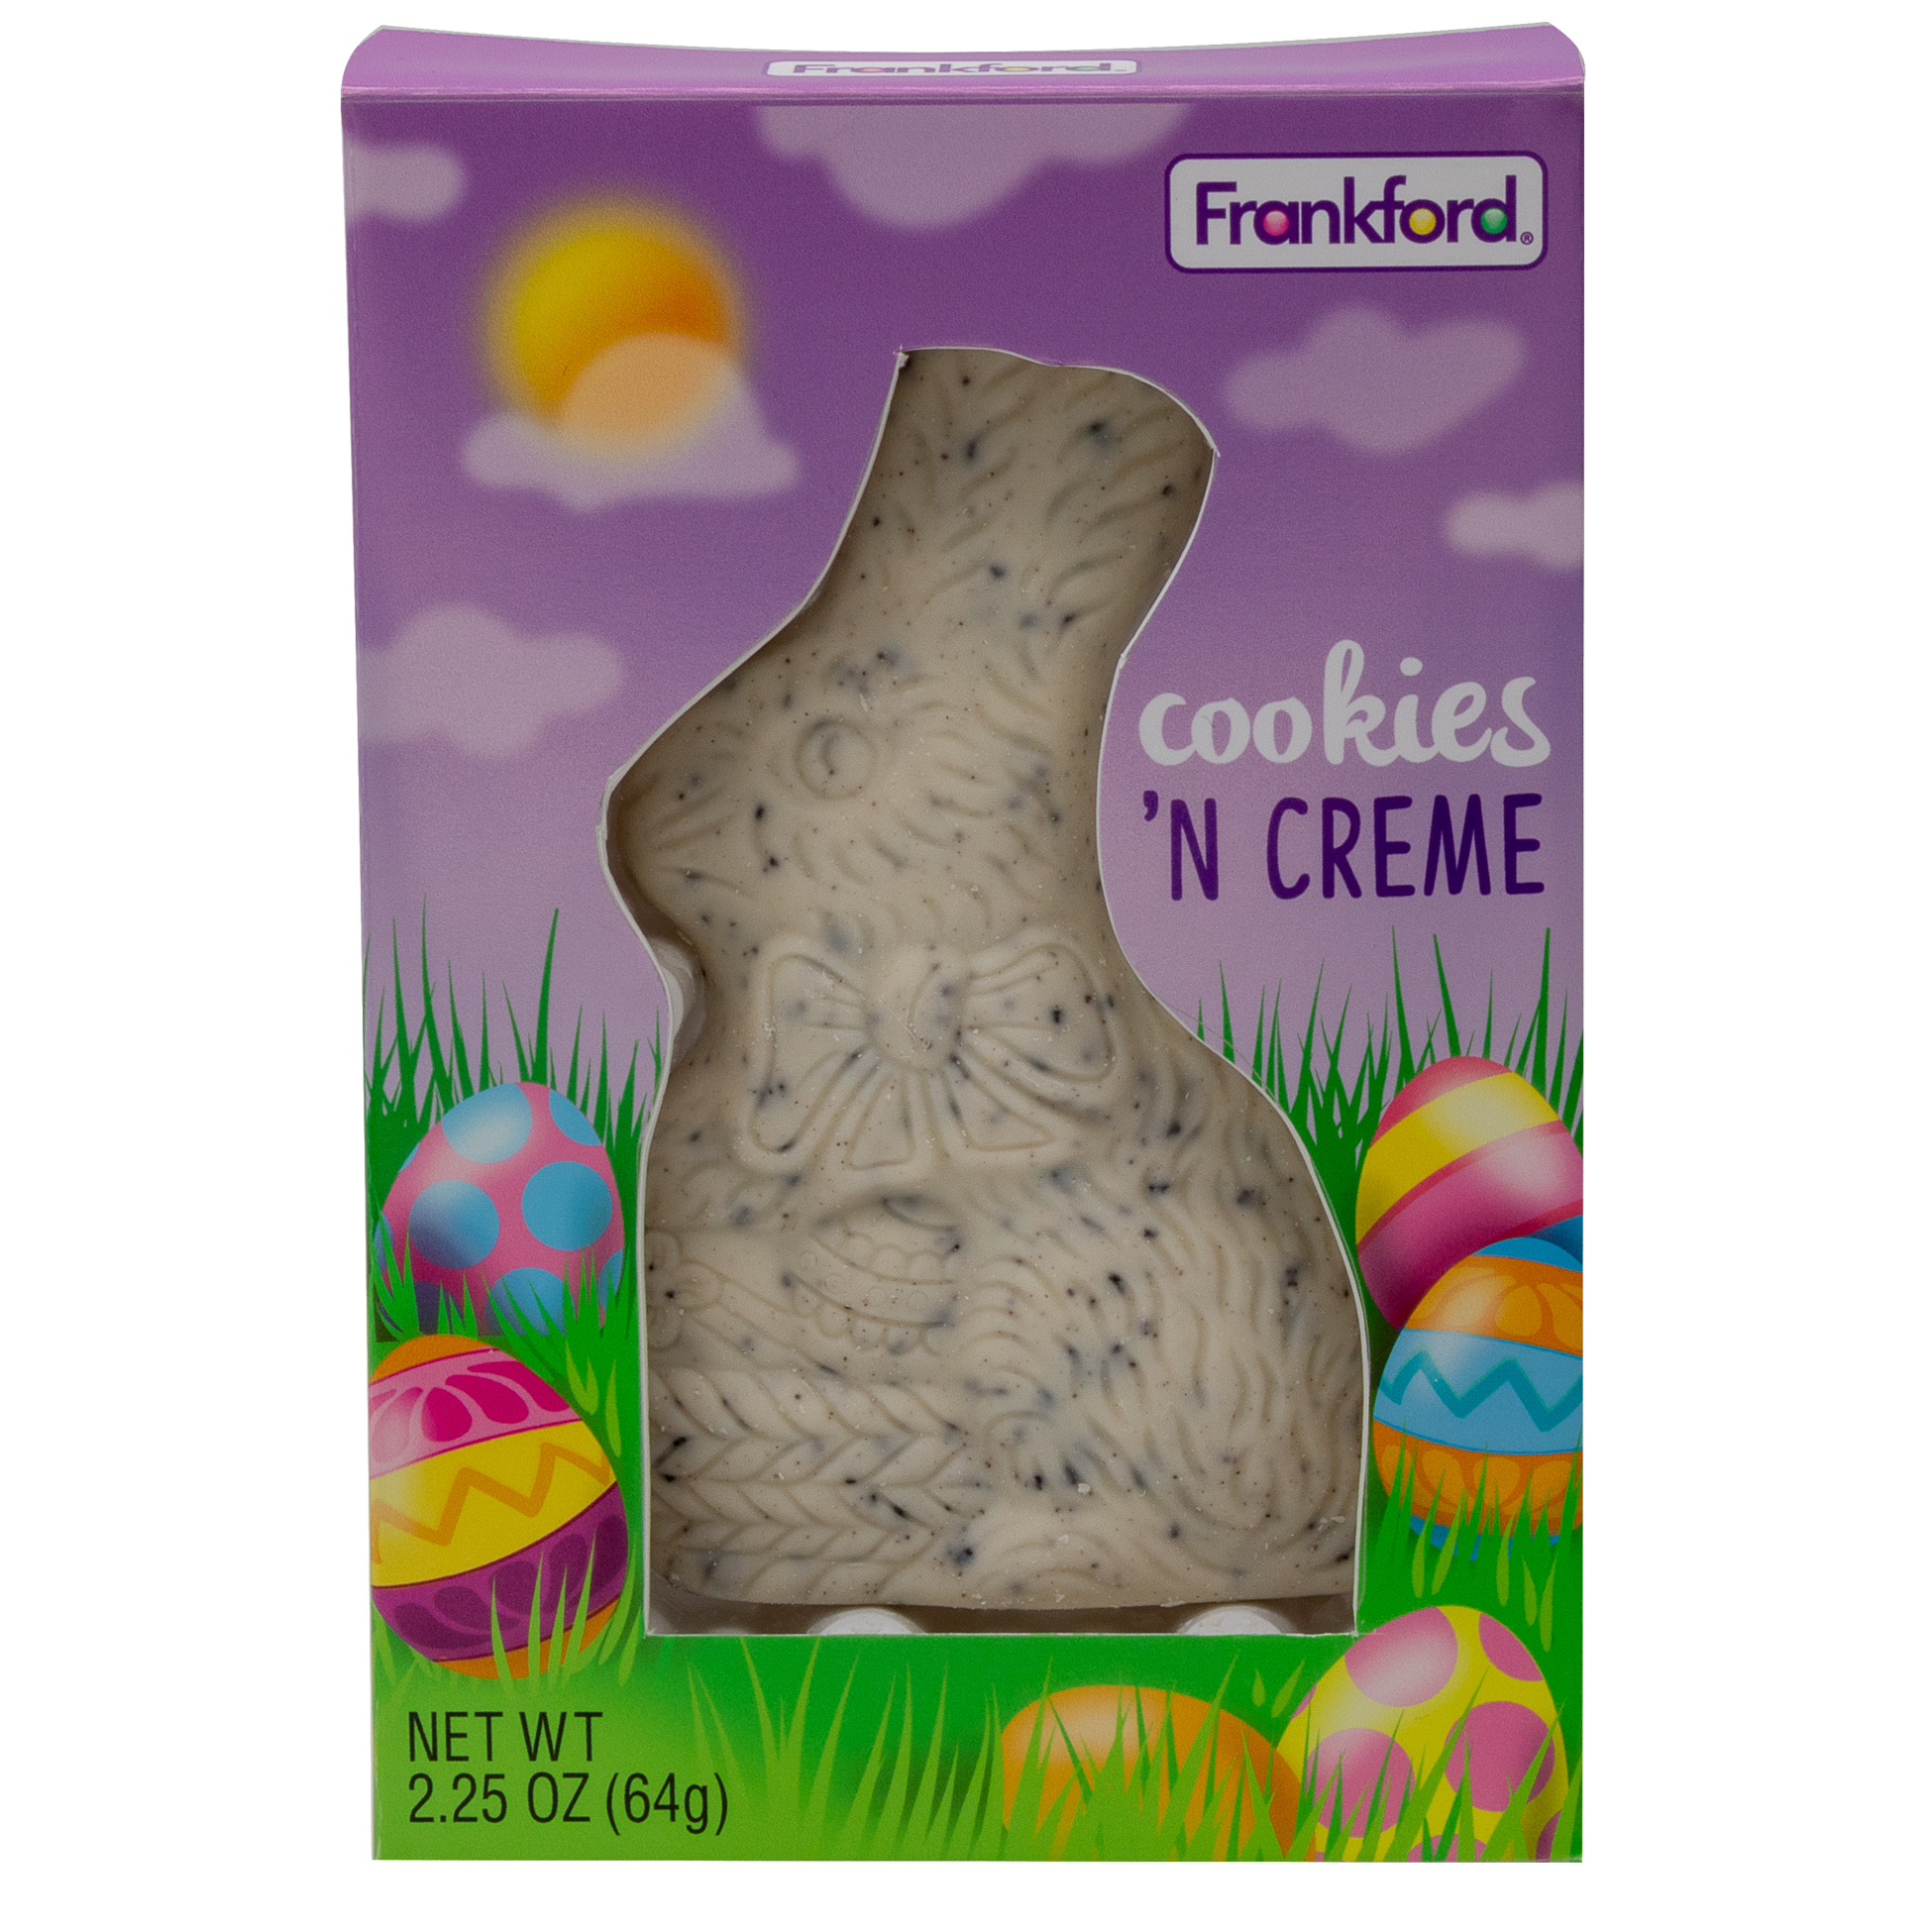 Frankford Cookies & Creme Easter Bunny 2.25 oz - image 1 of 6